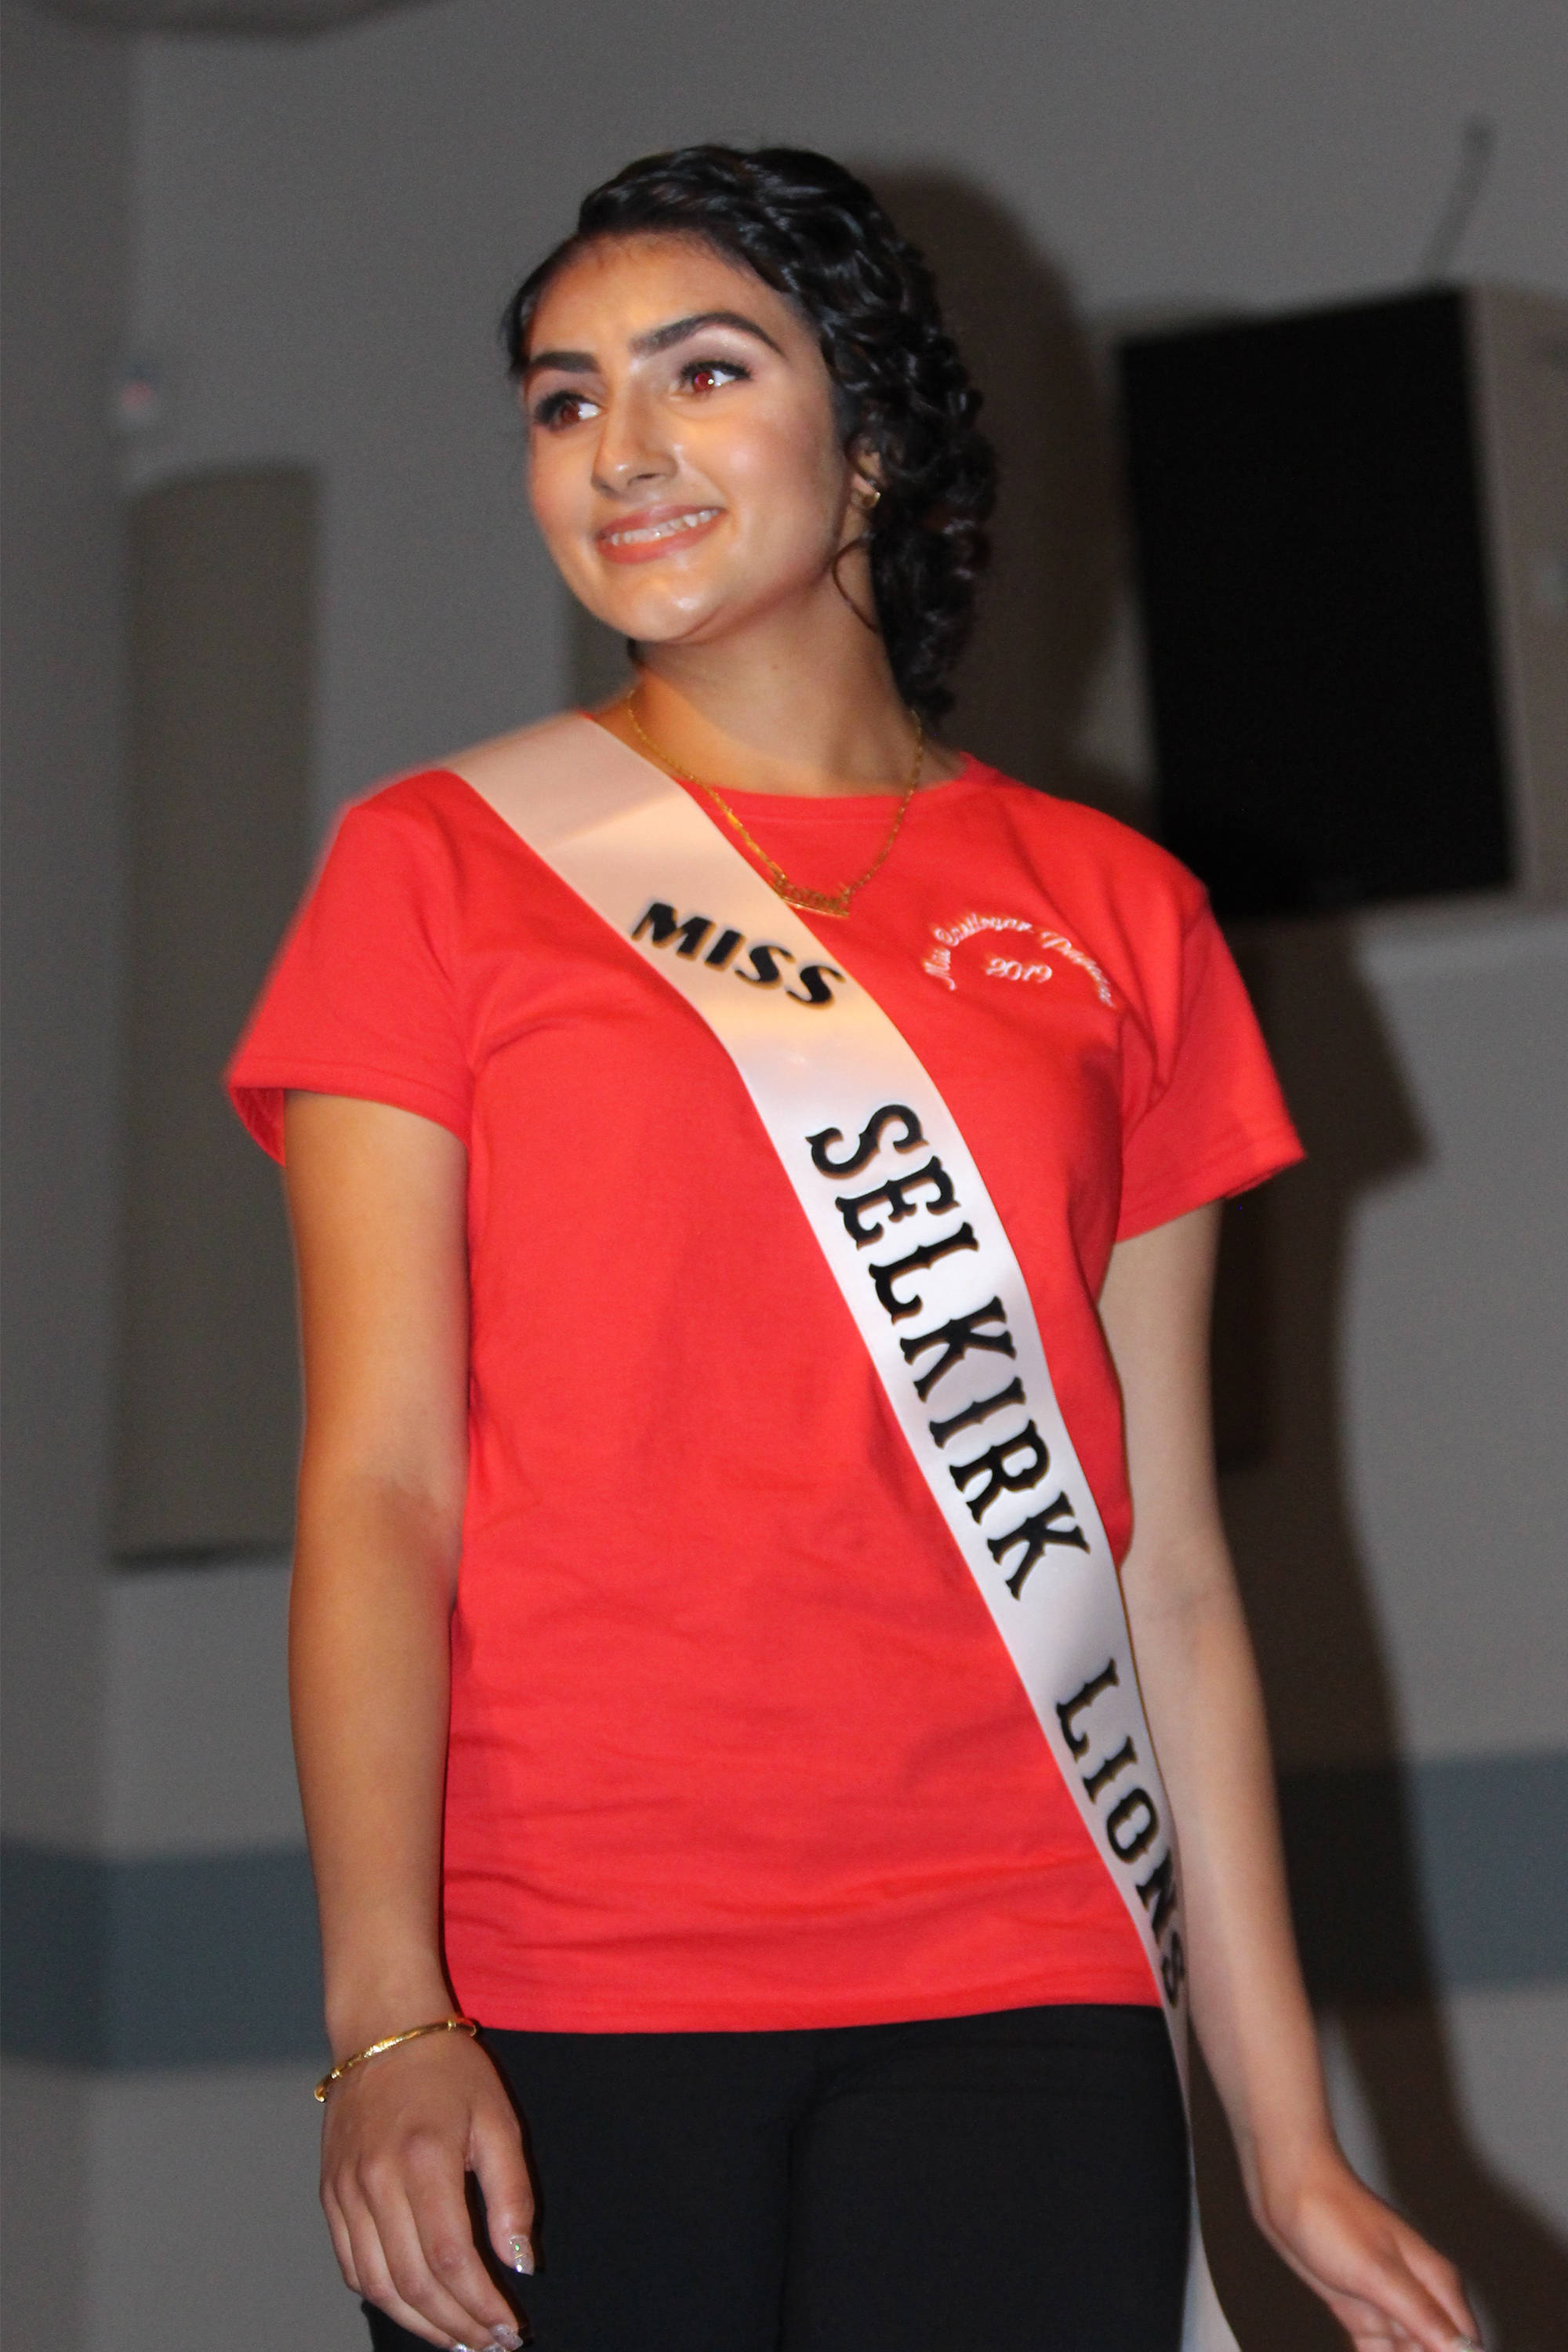 17141663_web1_190606-CAN-pageant10